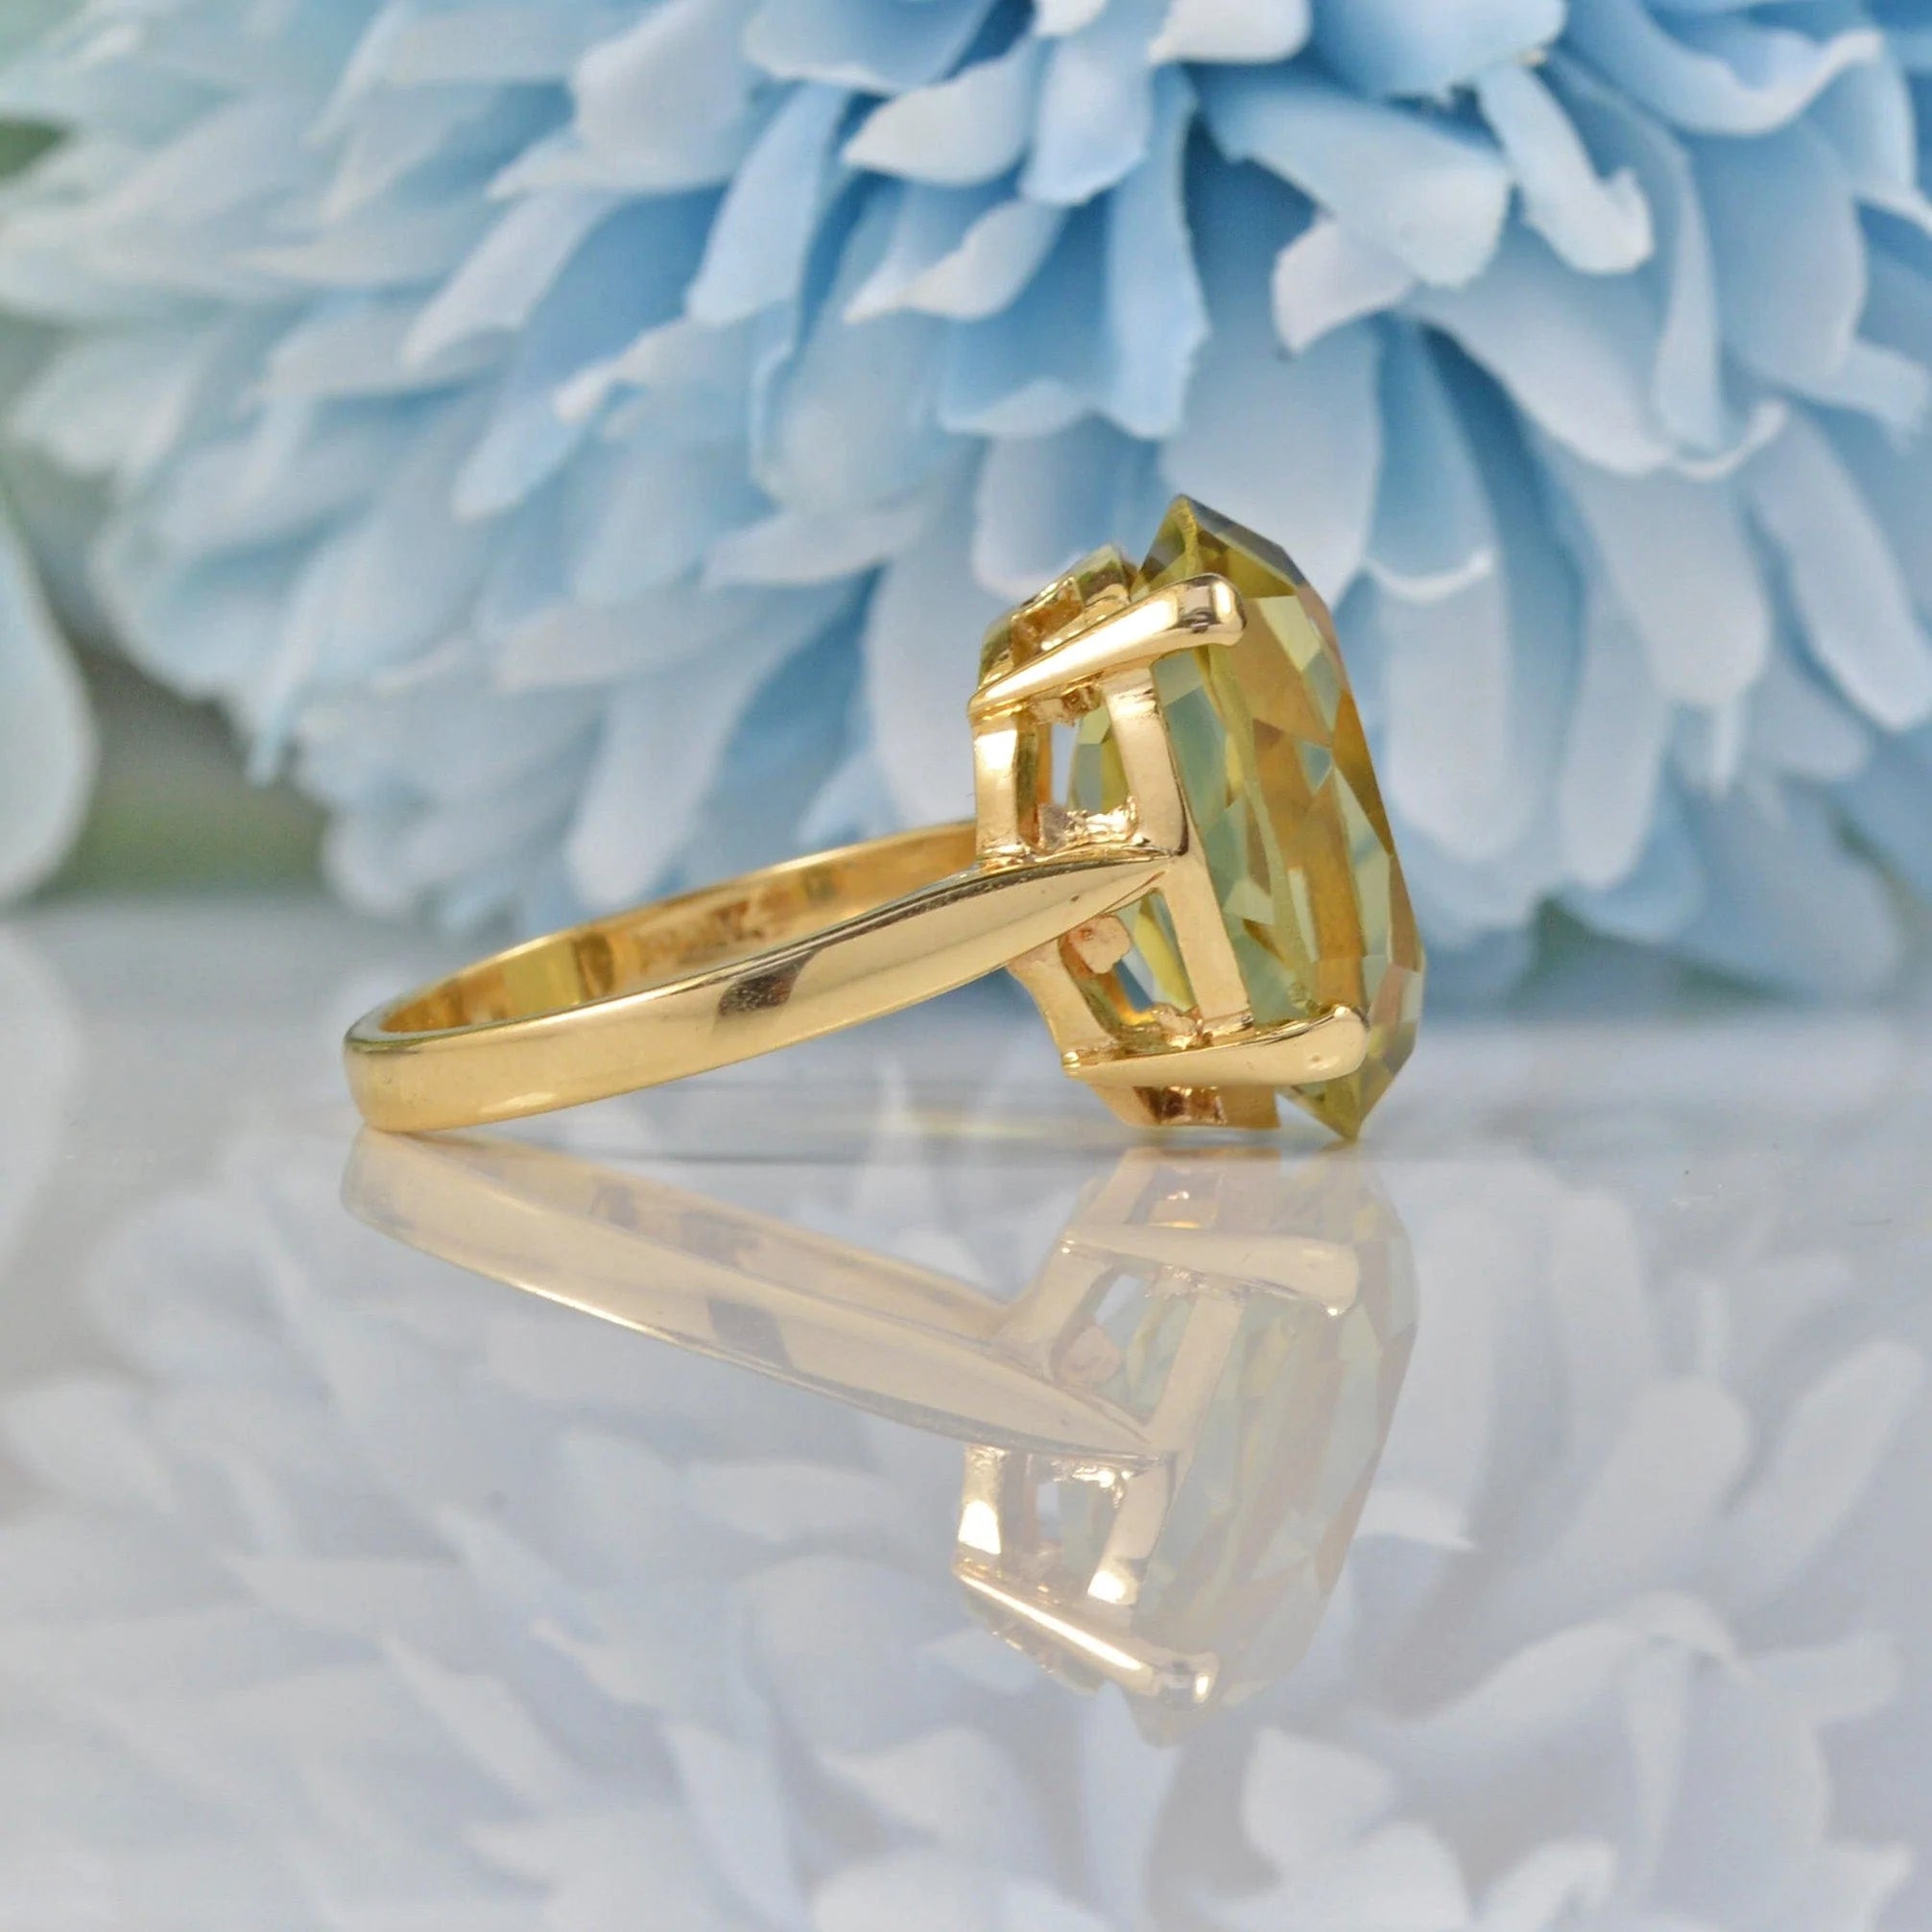 VINTAGE CITRINE 9CT GOLD SOLITAIRE DRESS RING